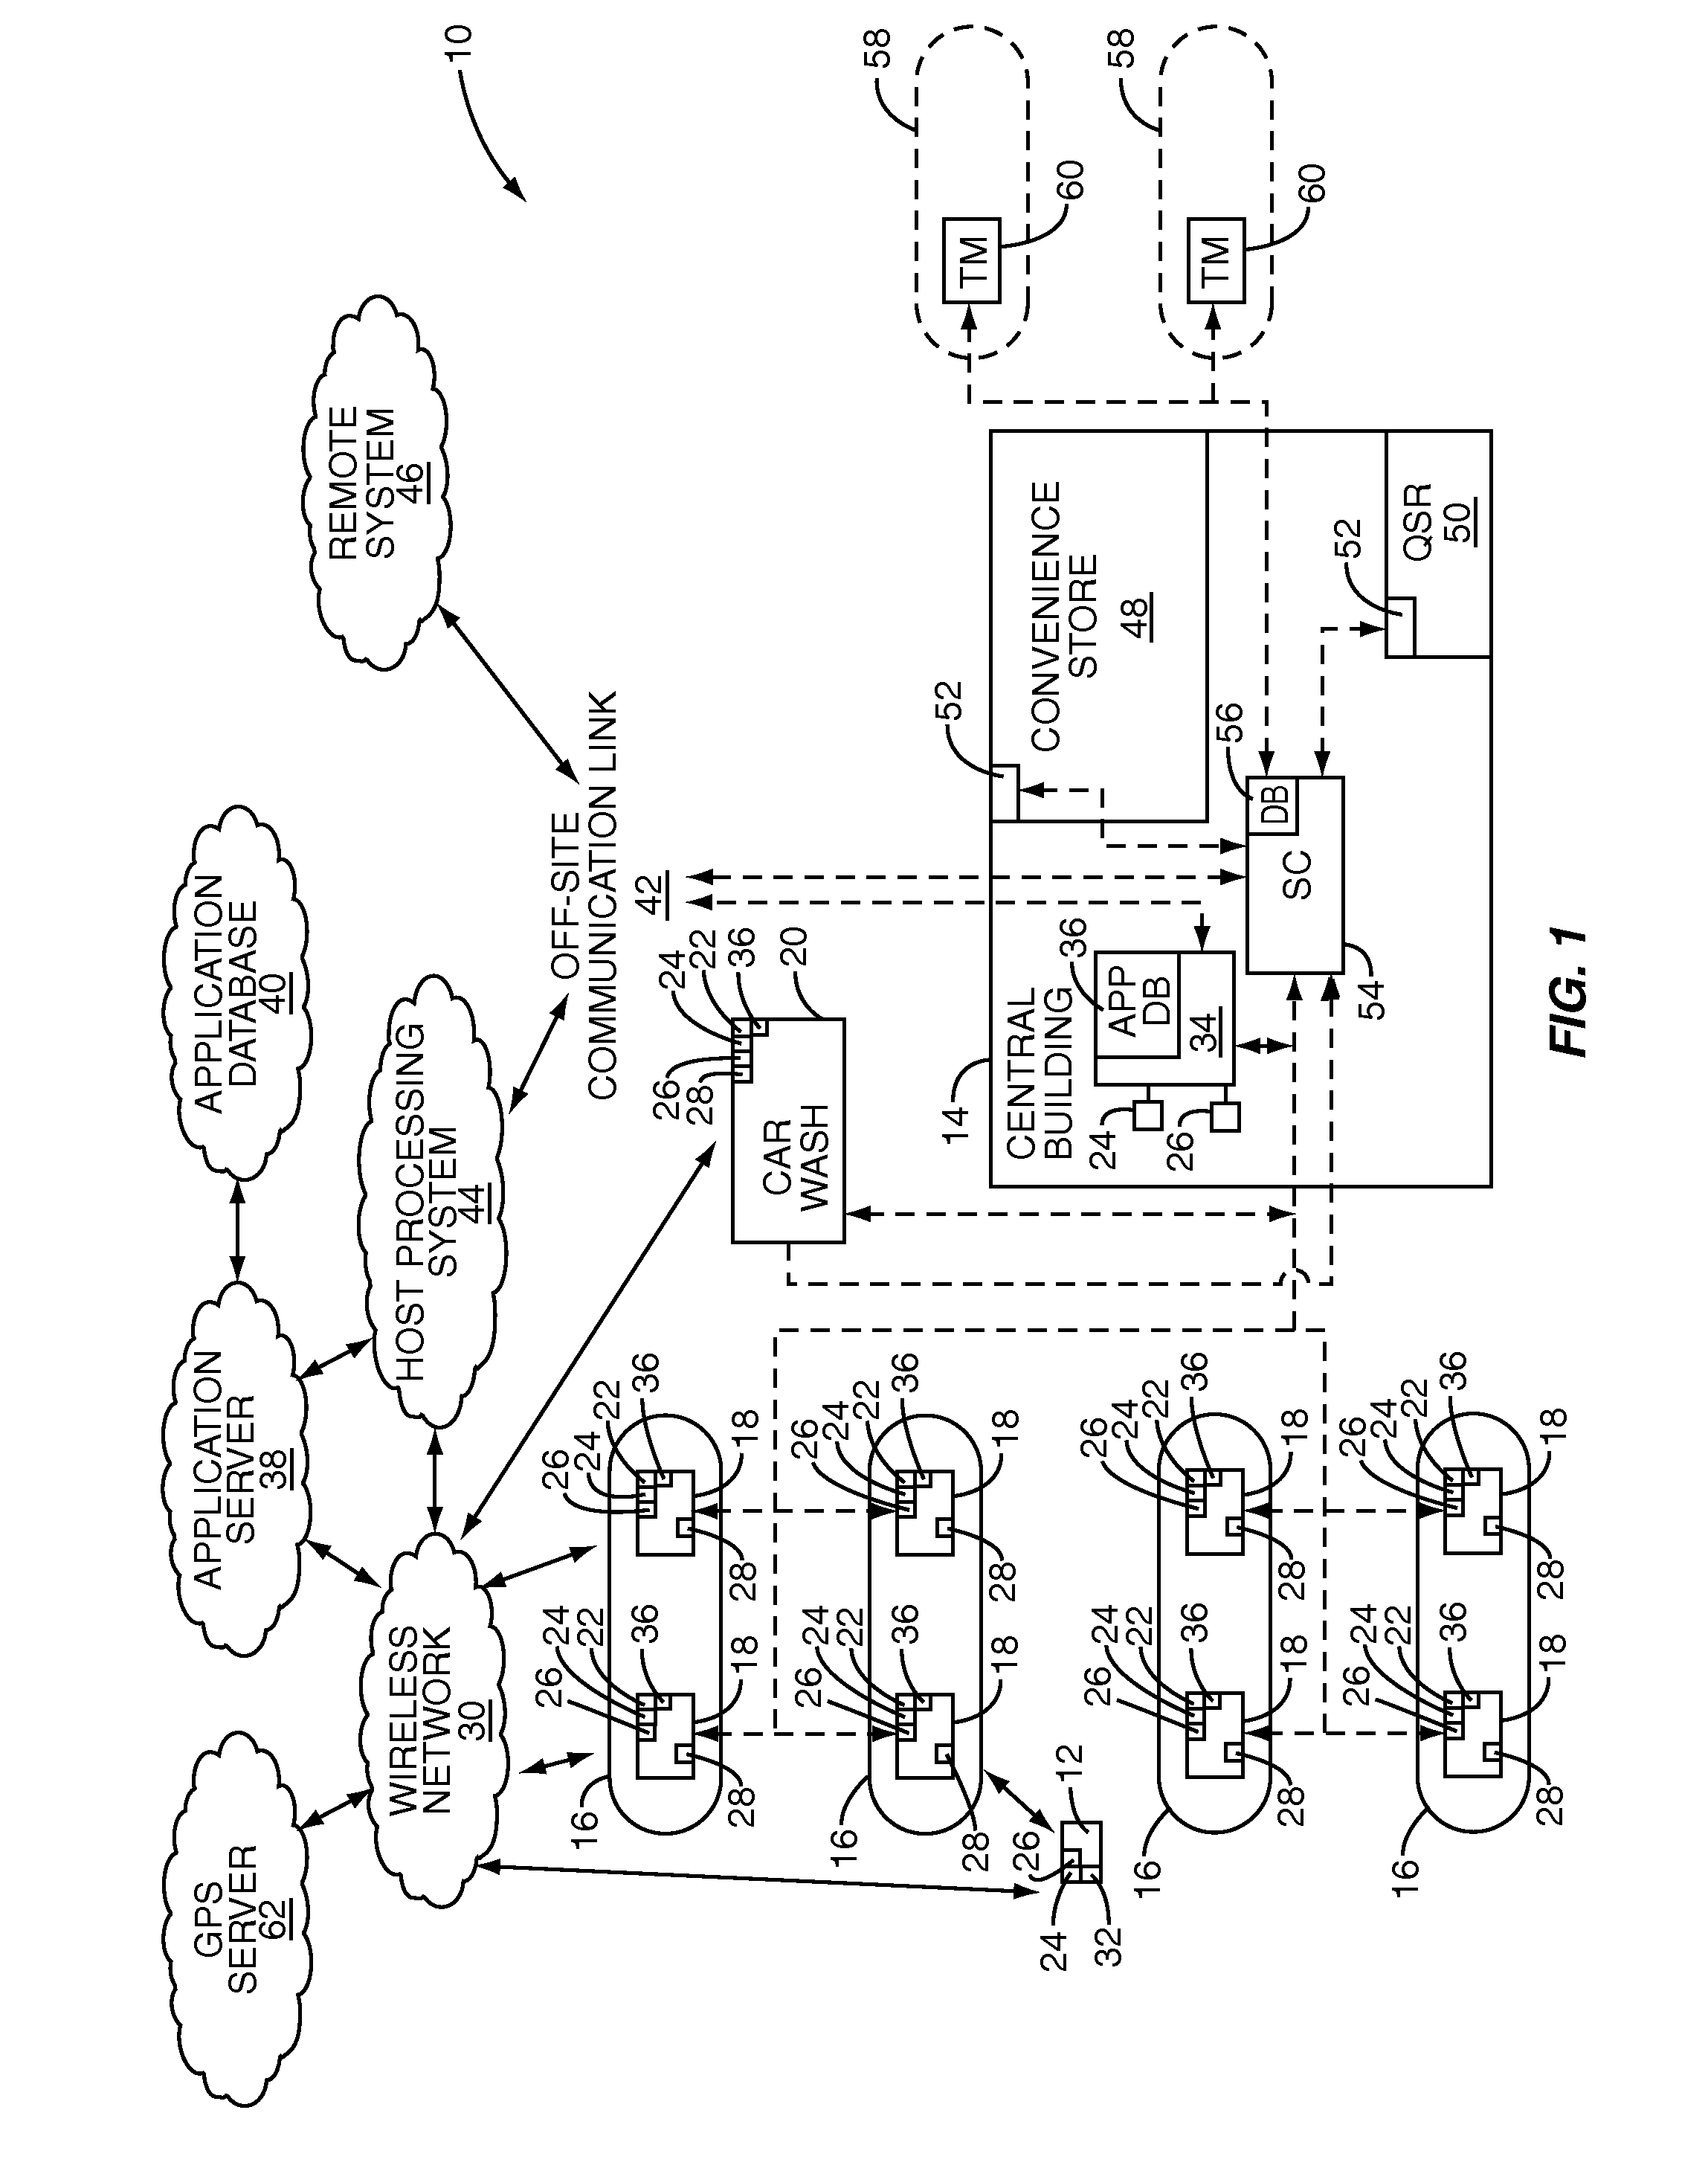 System and method for providing receipts, advertising, promotion, loyalty programs, and contests to a consumer via an application-specific user interface on a personal communication device